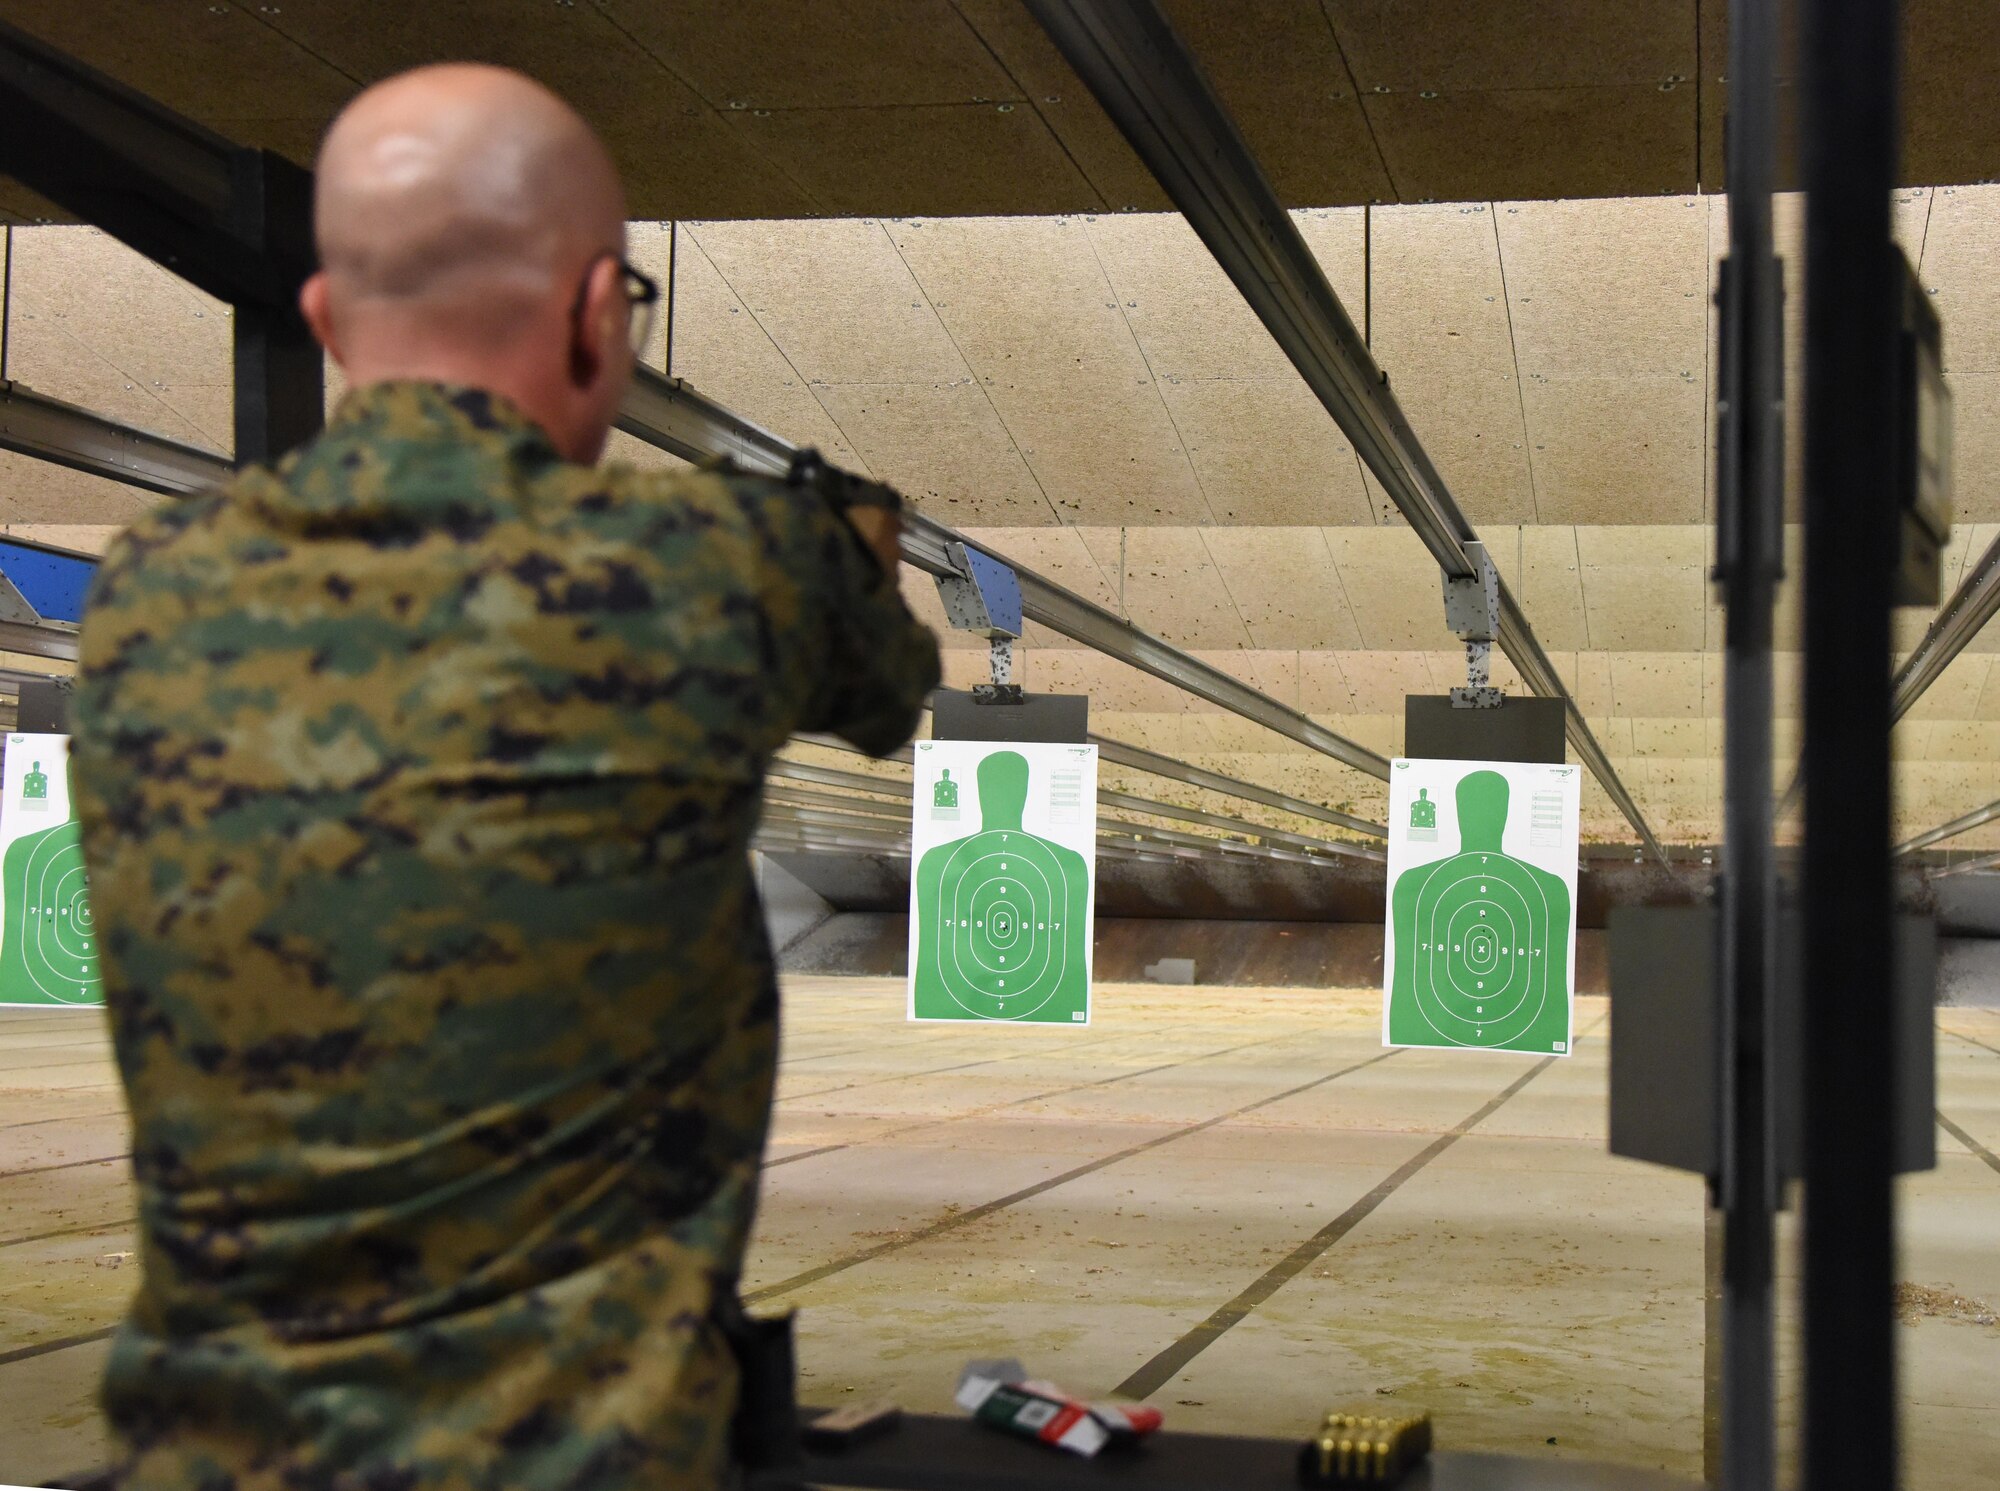 U.S. Marine Corps Gunnery Sgt. Michael Heacock, Keesler Marine Detachment instructor, participates in the 81st Security Forces Squadron “Top Shot” competition Dec. 1, 2016, on Keesler Air Force Base, Miss. The event was held at the indoor firing range to raise funds for the Combined Federal Campaign. (U.S. Air Force photo by Kemberly Groue)